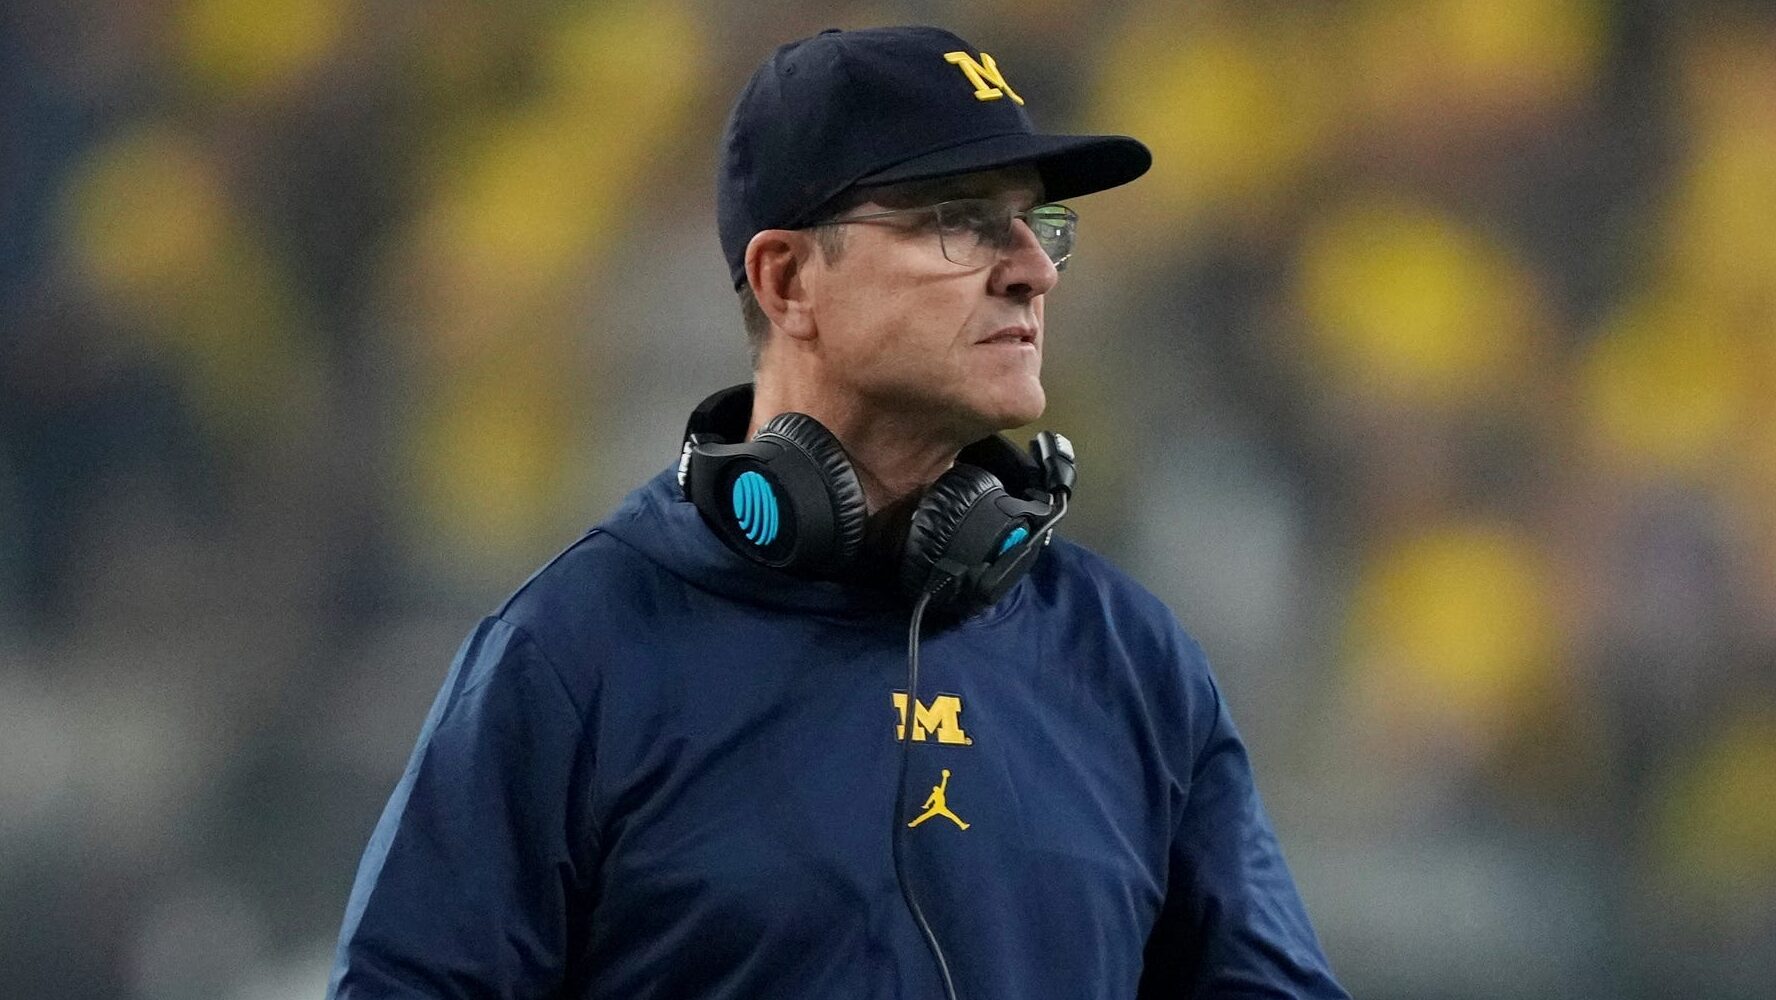 Former Michigan Head Football Coach Jim Harbaugh stands on the sidelines